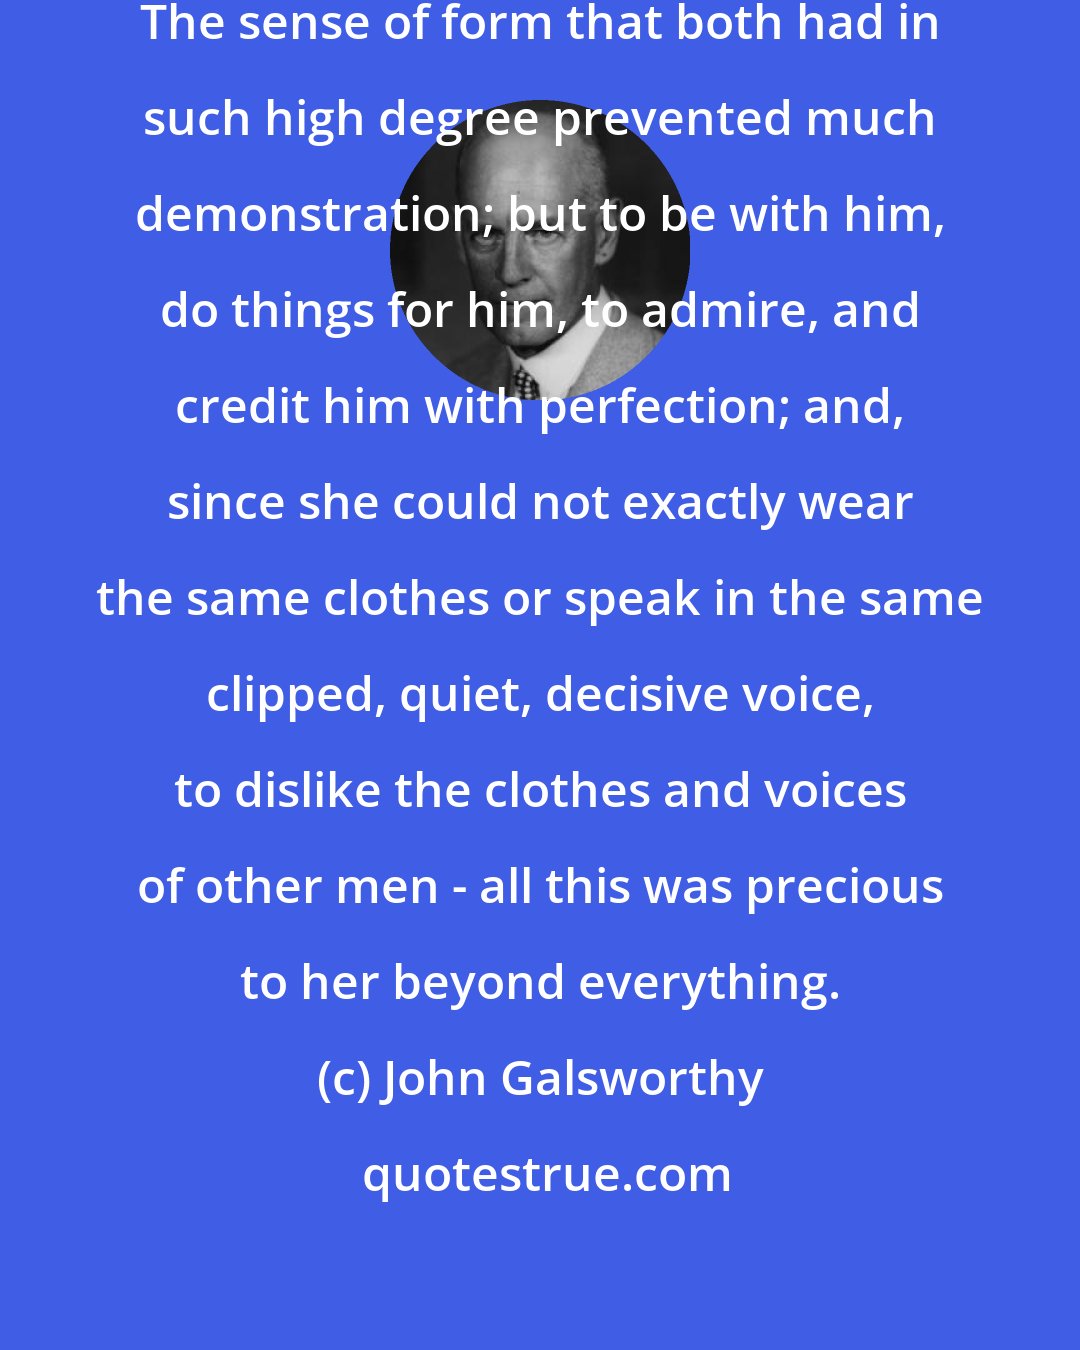 John Galsworthy: Only love makes fruitful the soul. The sense of form that both had in such high degree prevented much demonstration; but to be with him, do things for him, to admire, and credit him with perfection; and, since she could not exactly wear the same clothes or speak in the same clipped, quiet, decisive voice, to dislike the clothes and voices of other men - all this was precious to her beyond everything.